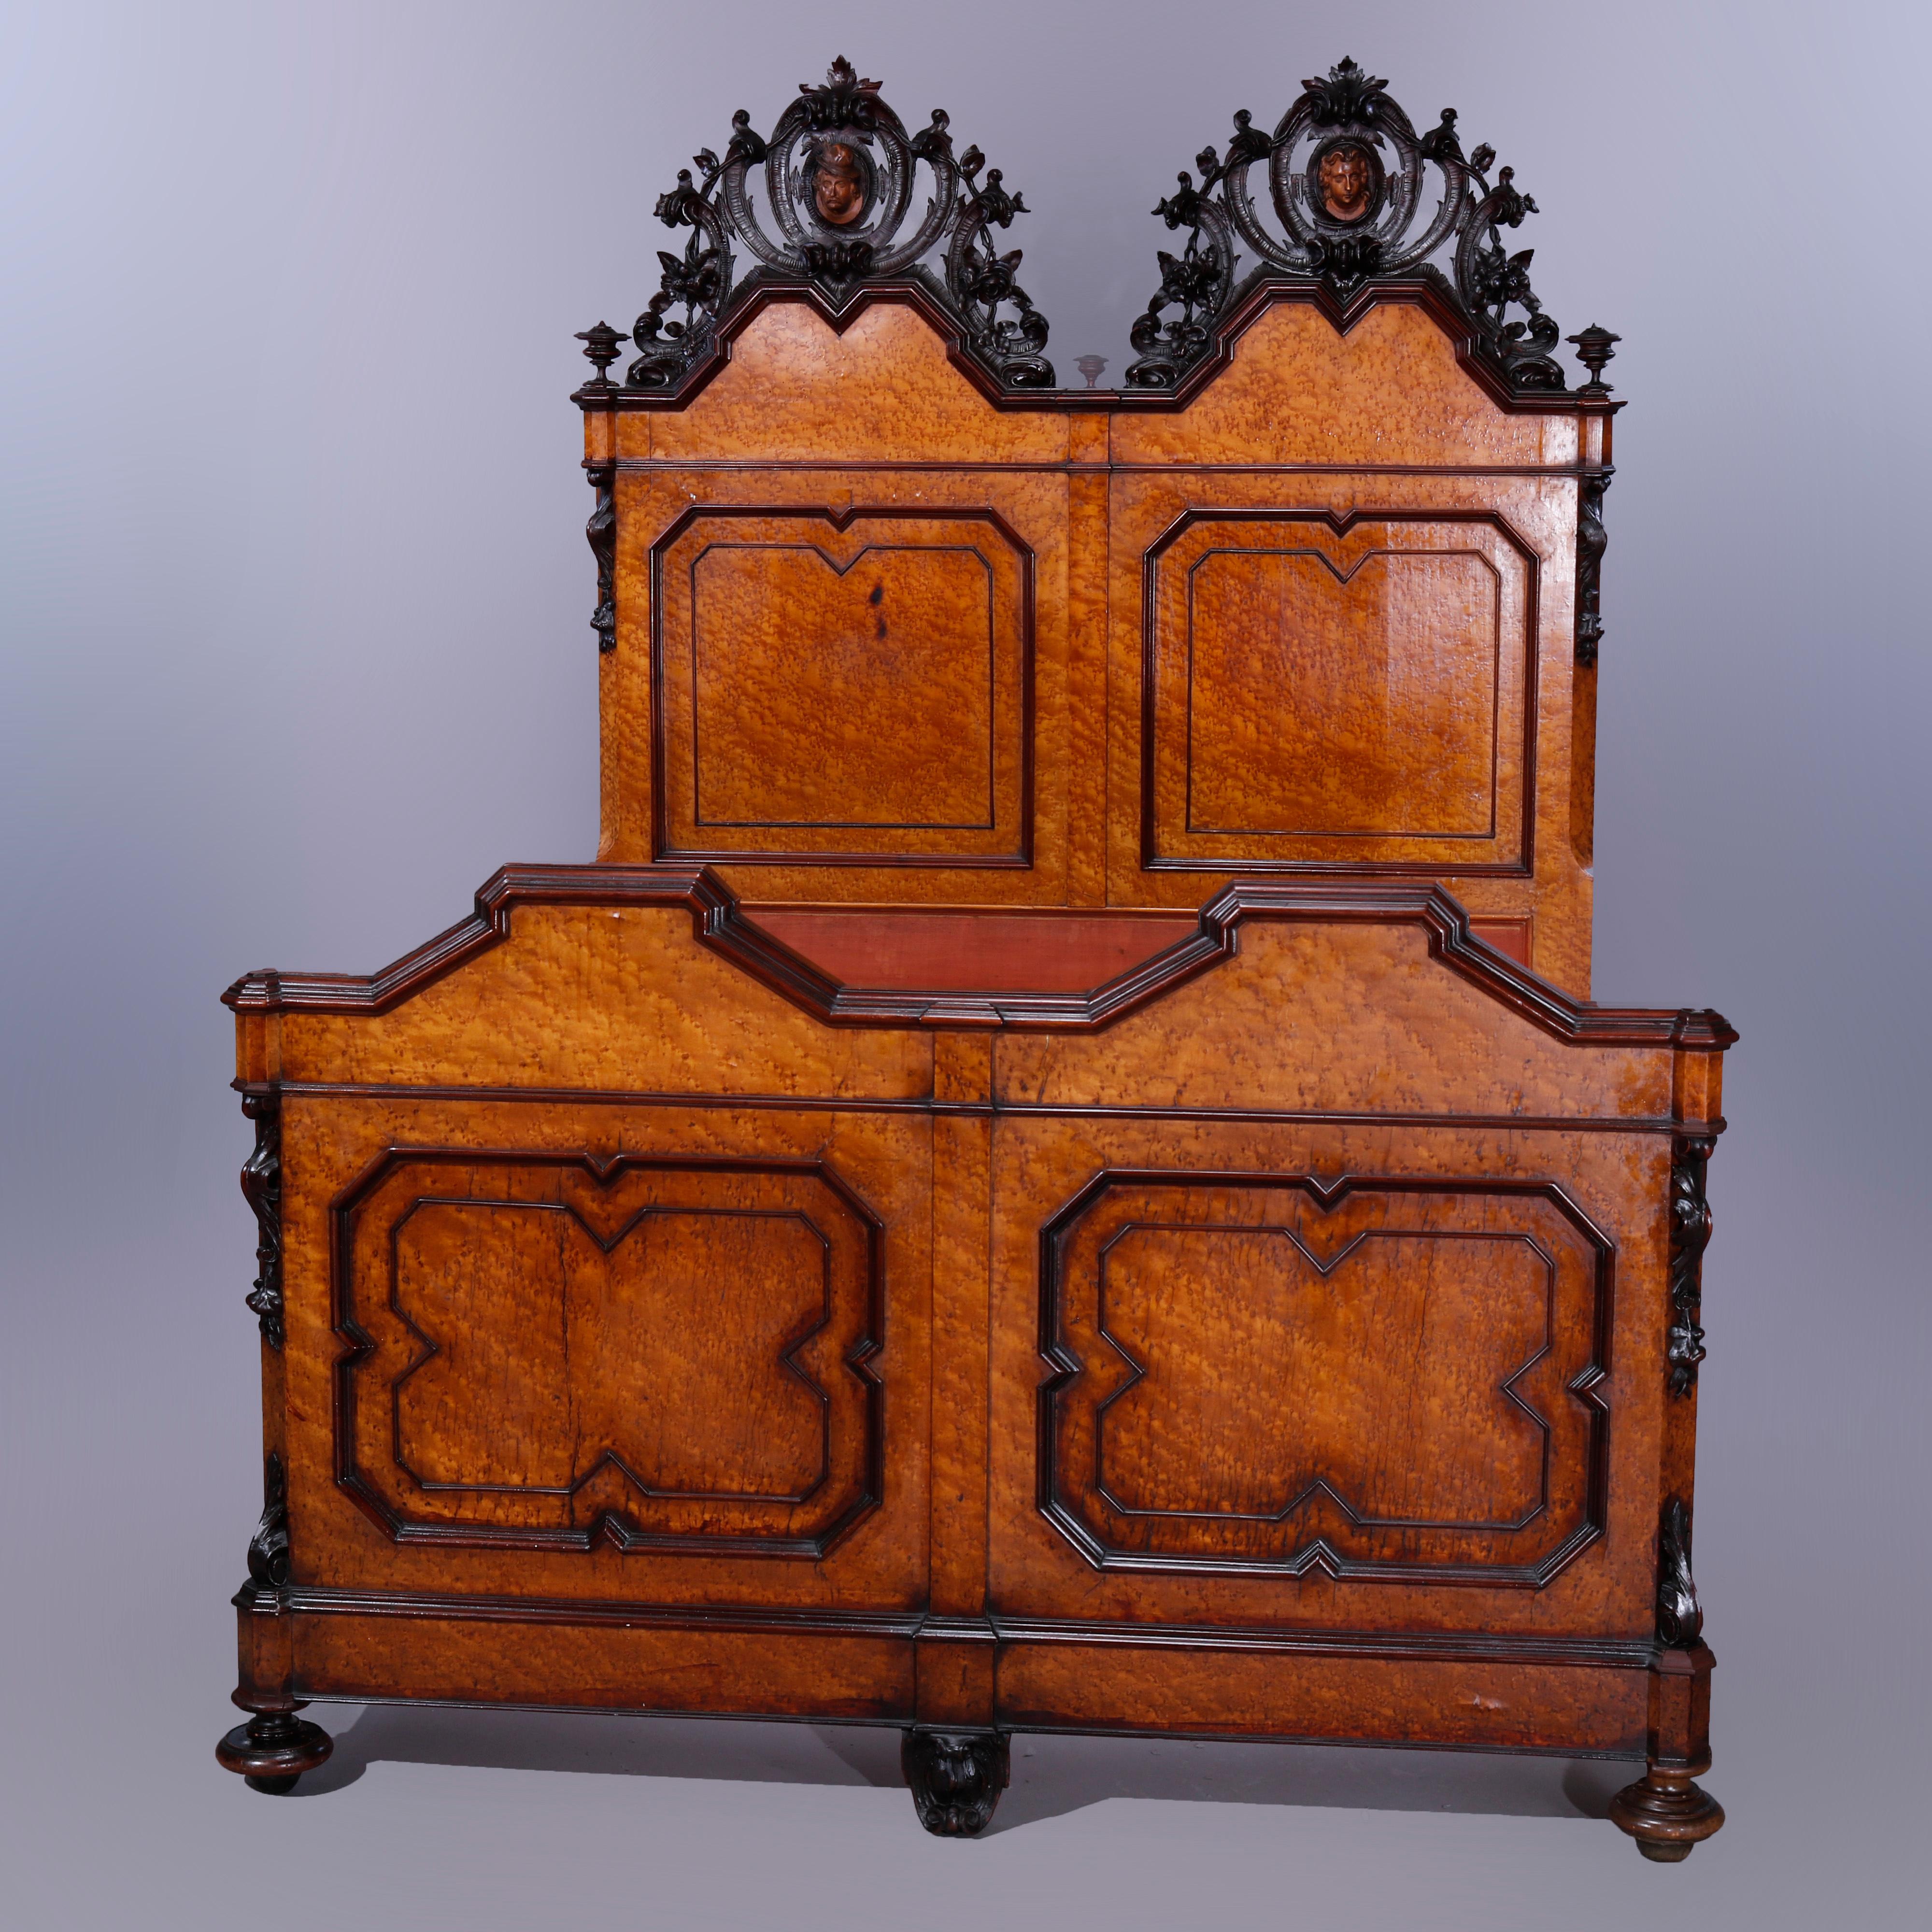 An antique Rococo Revival figural double or full size bed offers birdseye maple construction with heavily carved and pierced foliate walnut crest with central masks and flanking urn form finials over paneled headboard with walnut trimming, raised on